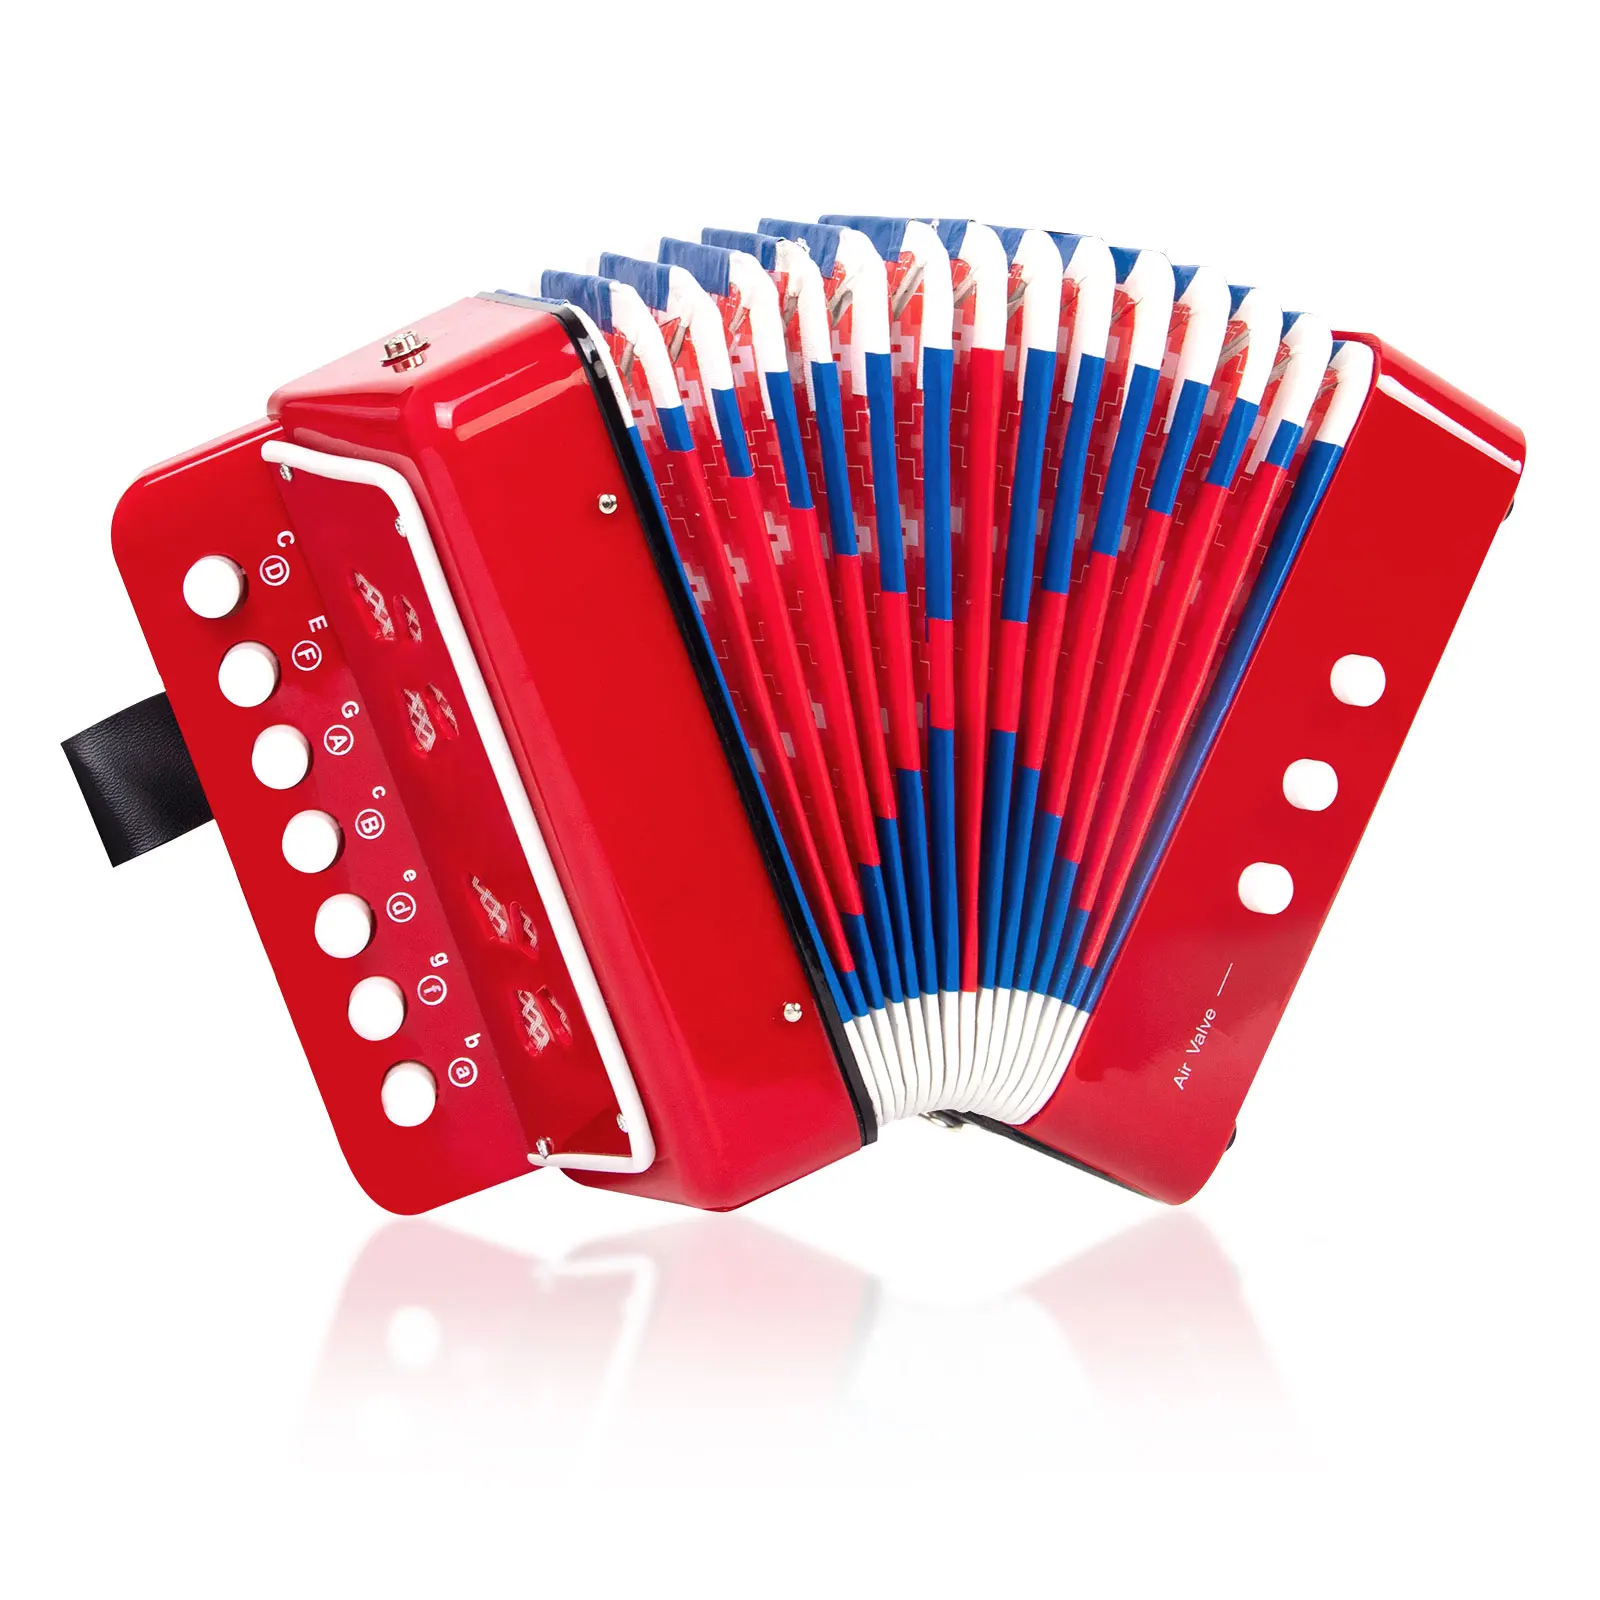 Oypla 7 Keys 2 Bass Childrens Red Toy Accordion Musical Instrument 3628A2P